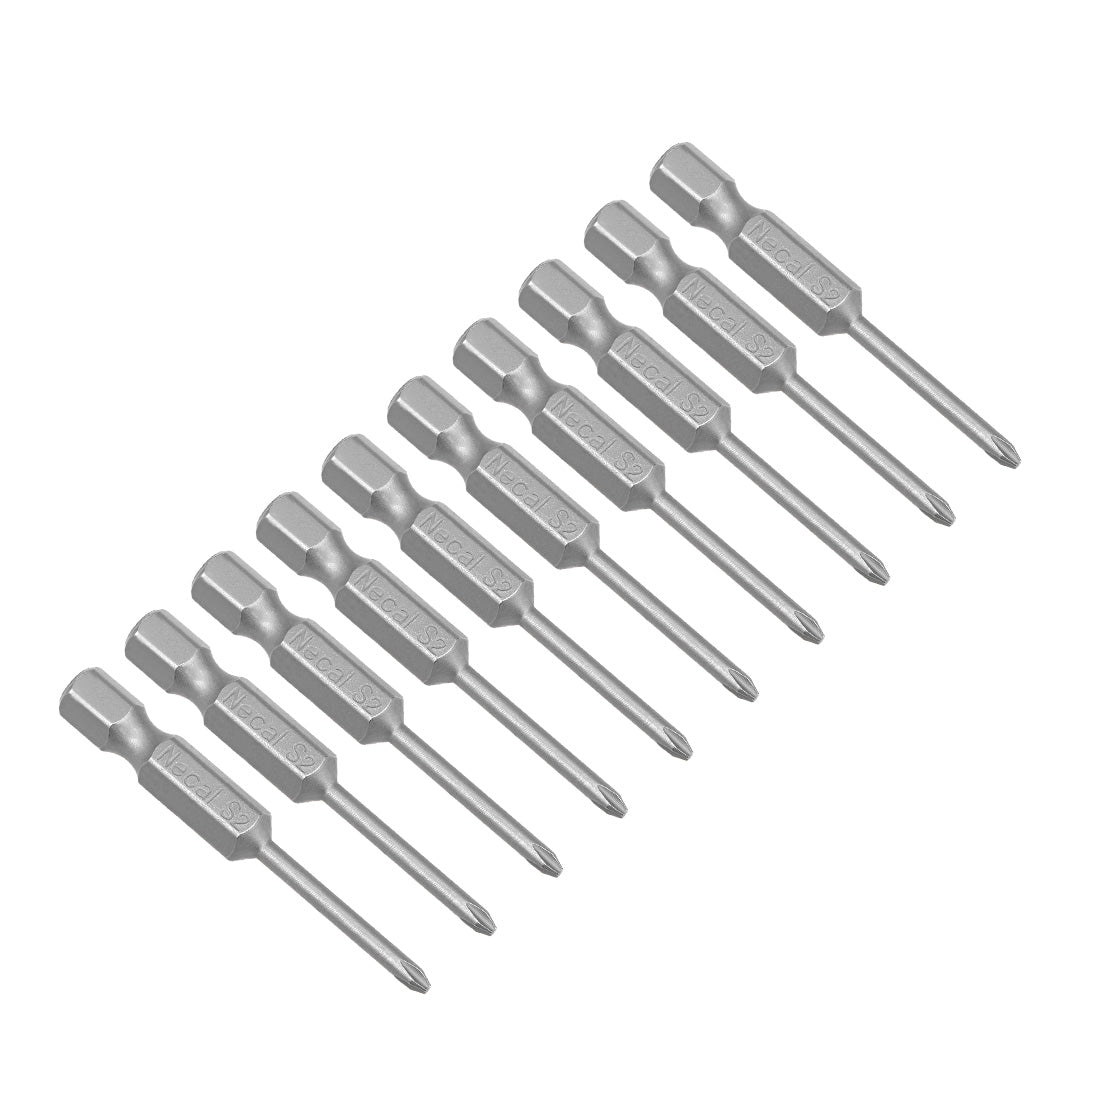 uxcell Uxcell 10 Pcs Magnetic Phillips Screwdriver Bits, Hex Shank S2 Power Tool